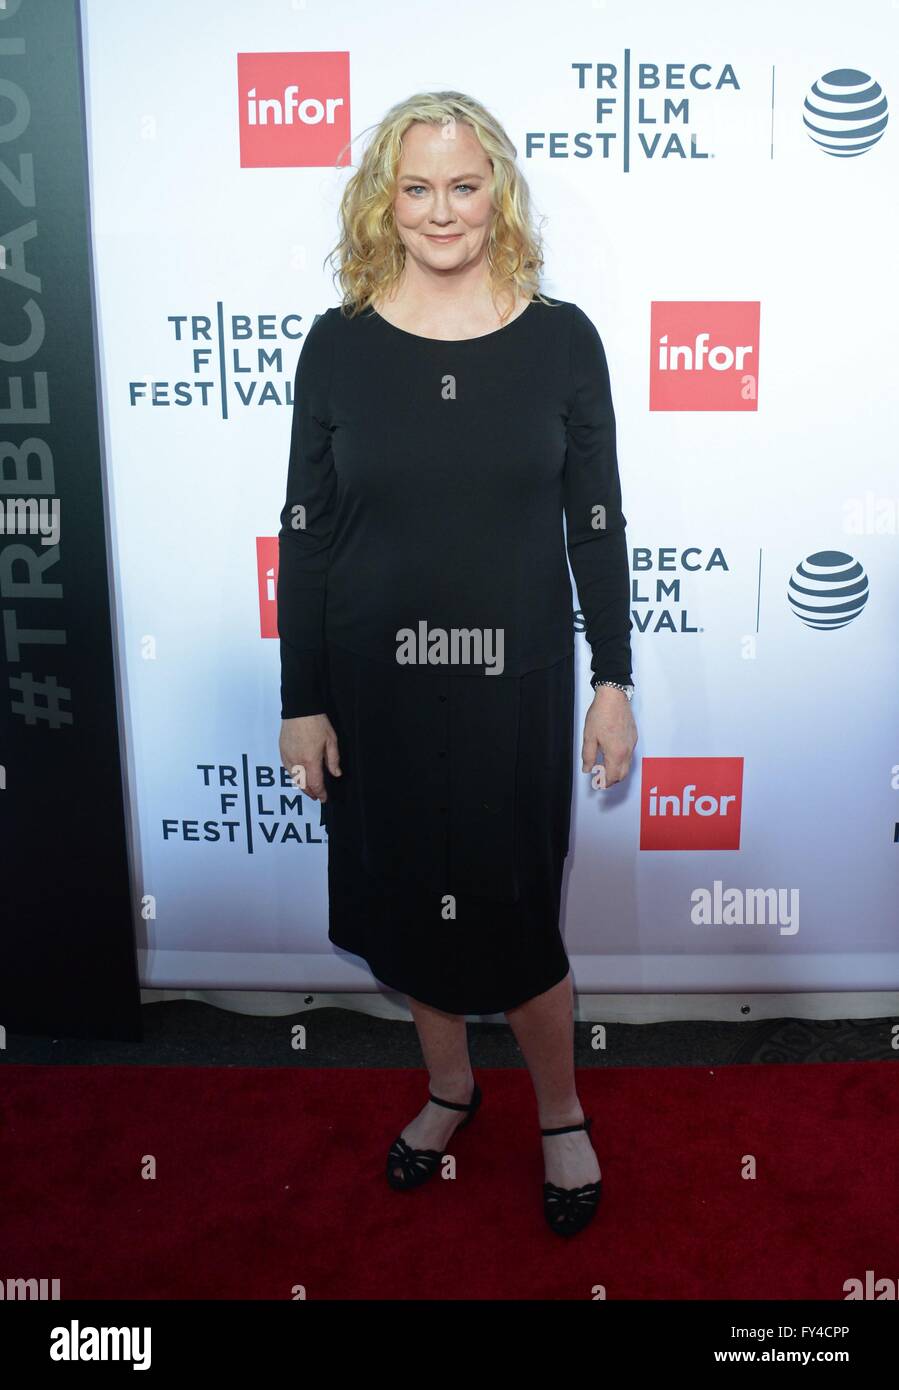 New York, NY, USA. 21st Apr, 2016. Cybill Shepherd at arrivals for TAXI DRIVER Special Screening at 2016 Tribeca Film Festival, Beacon Theatre, New York, NY April 21, 2016. Credit:  Derek Storm/Everett Collection/Alamy Live News Stock Photo